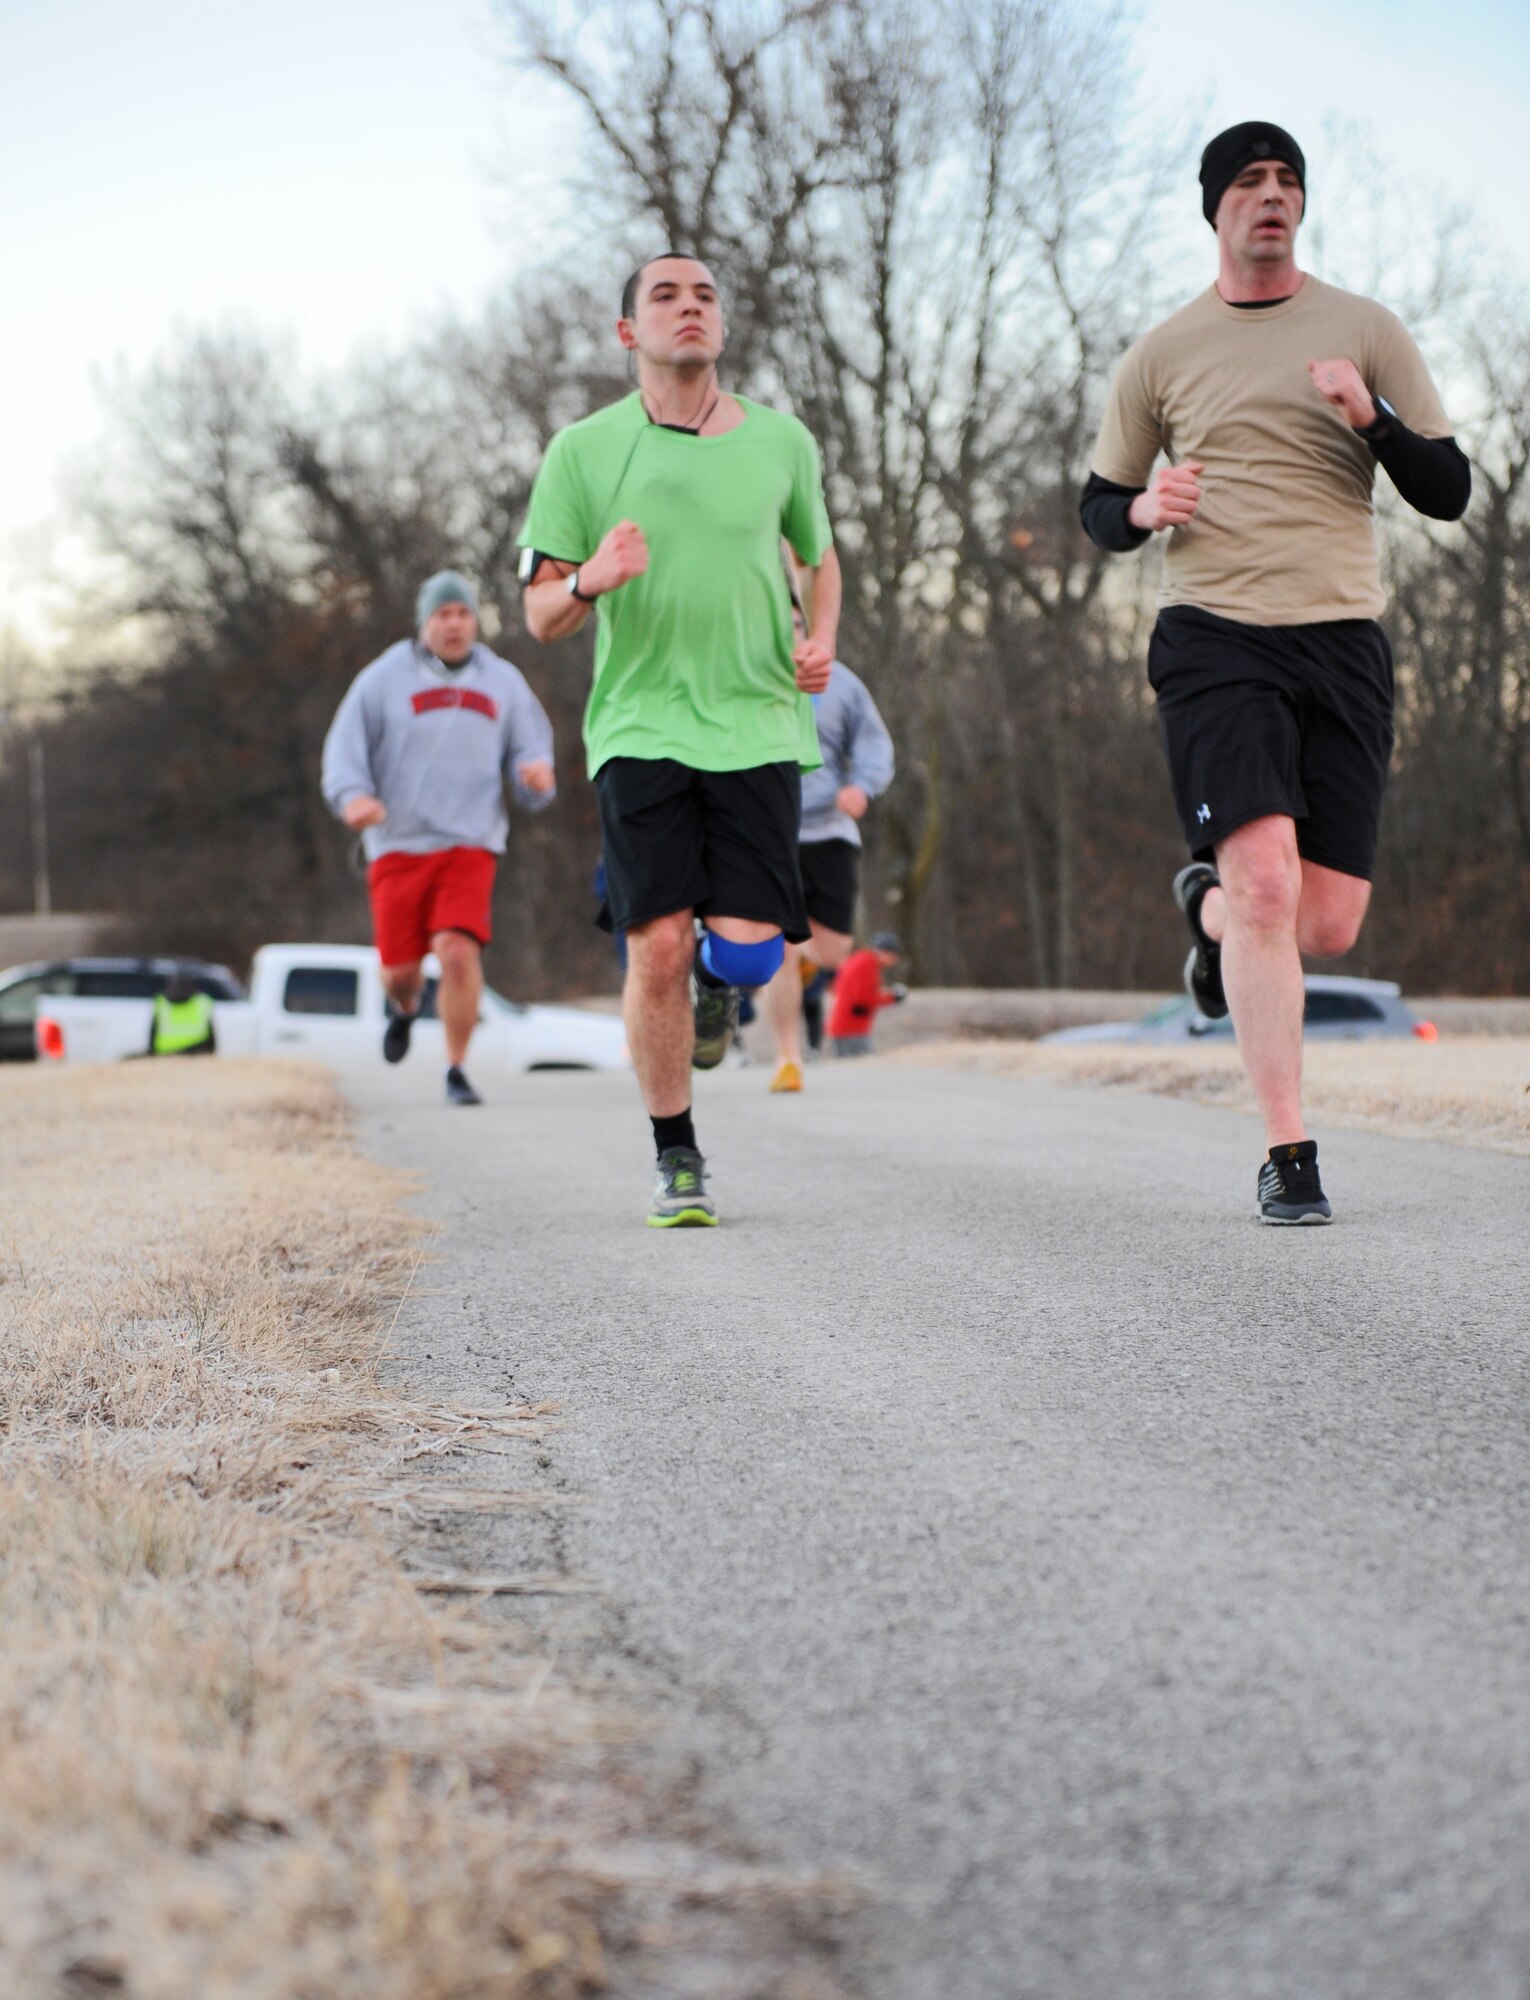 Members of Team Whiteman run toward the finish line during the Resolution 5k run at Whiteman Air Force Base, Mo., Jan. 29, 2016. An information expo was held after the run with representatives from the education office, physical therapy, mental health/ADAPT, the Chaplain Corps, health promotion director and the fitness center staff. The support agencies provided individuals with guidance to help reach their 2016 goal. (U.S. Air Force photo by Tech. Sgt. Miguel Lara III)